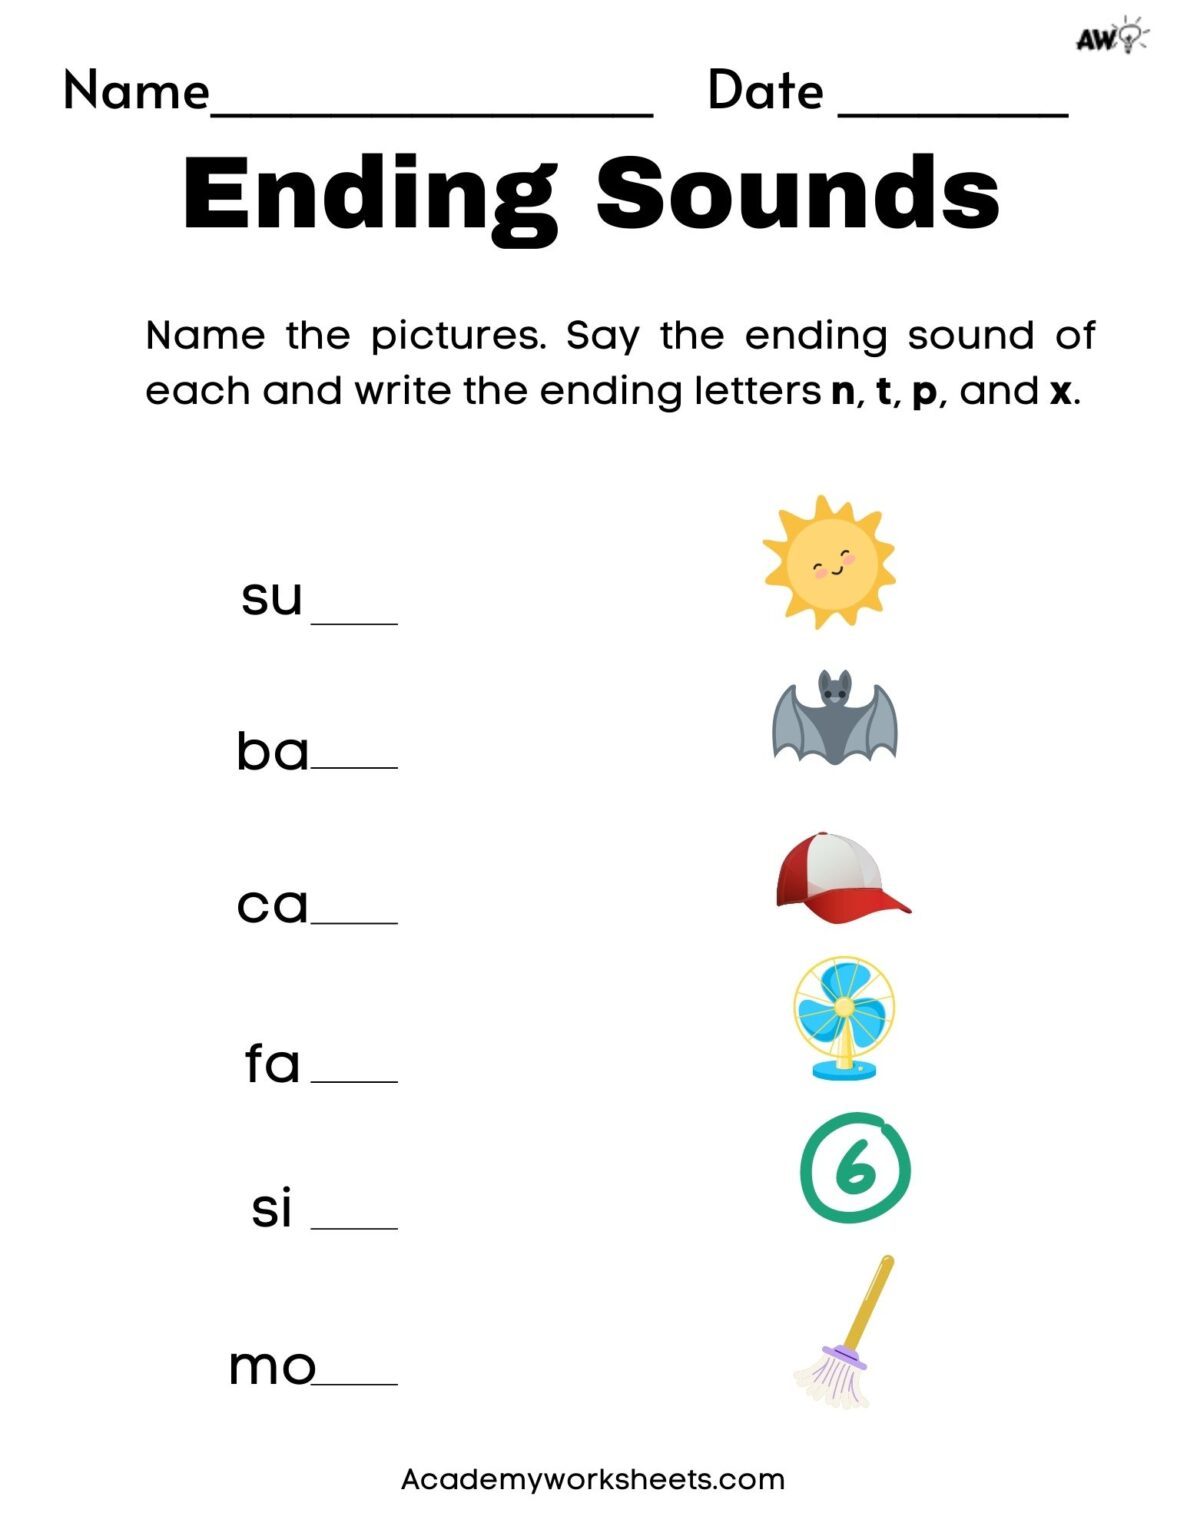 The Ultimate Ending Sounds Worksheets Free - Academy Worksheets